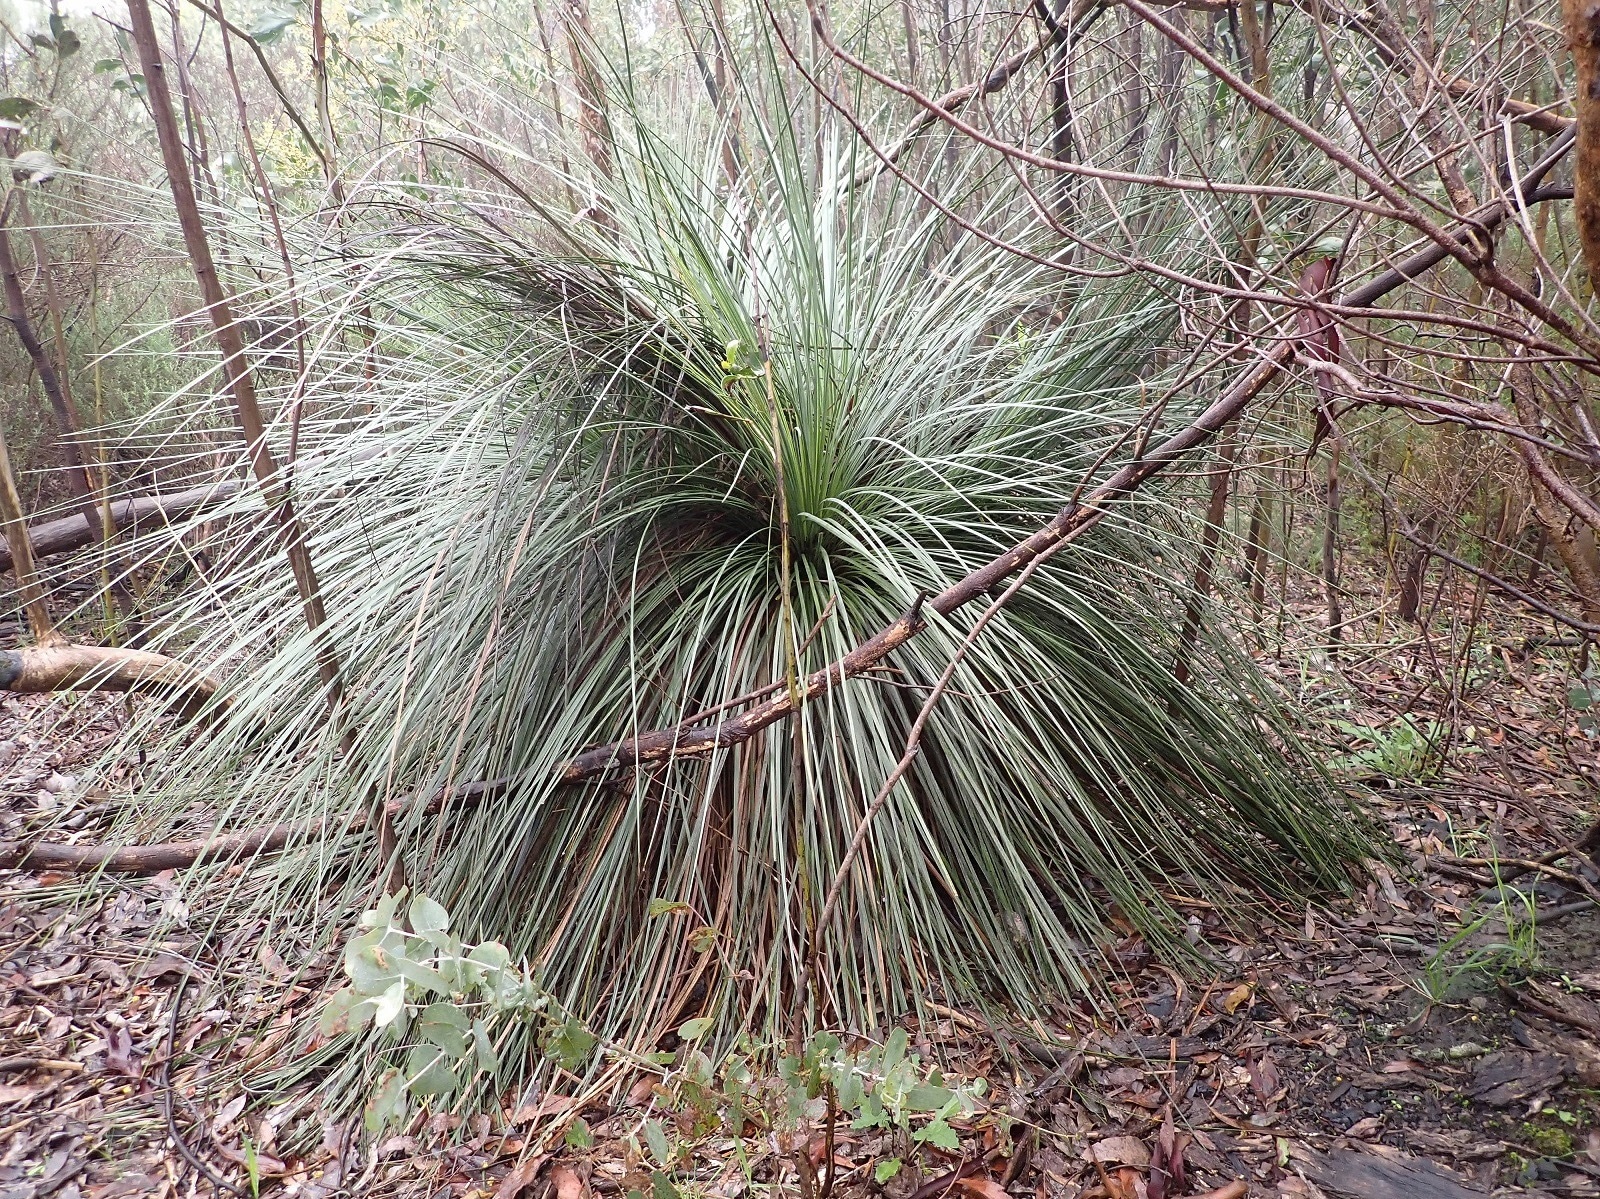 Hard Yacca: Grass Skirts are a Life Saver for Many Animals, but Fire and Disease Threaten Their Survival